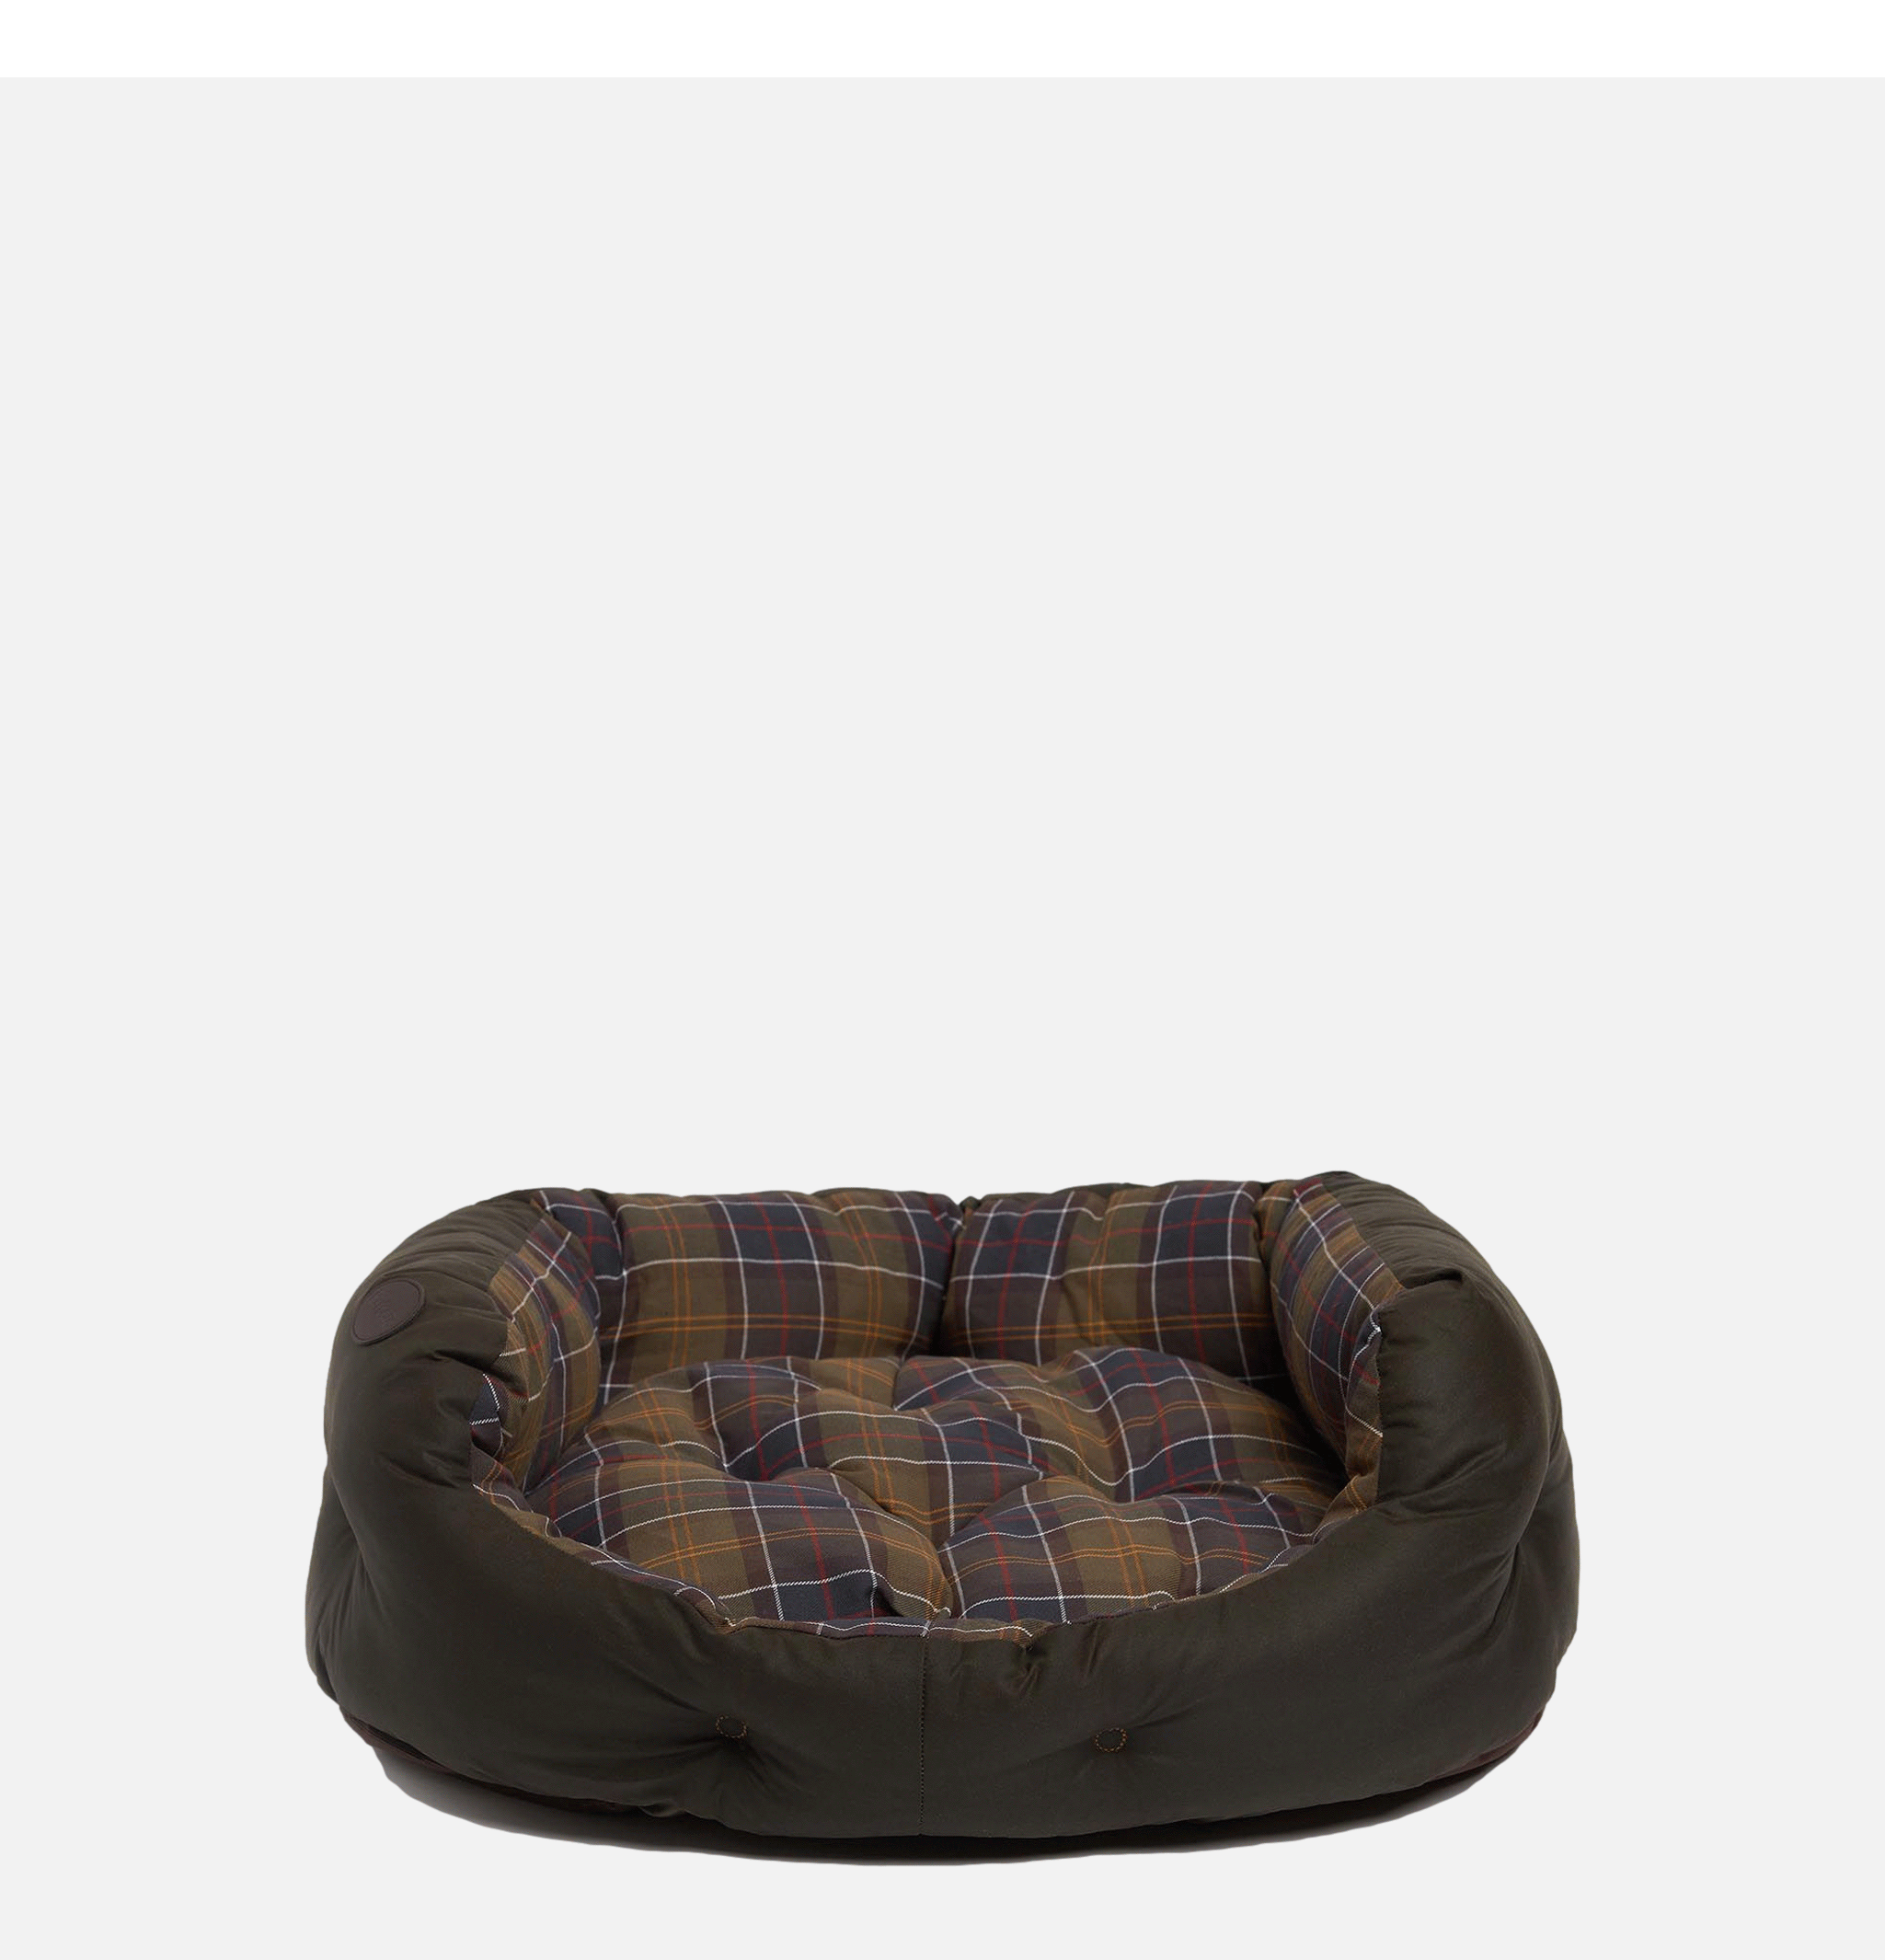 30in Luxury Dog Bed